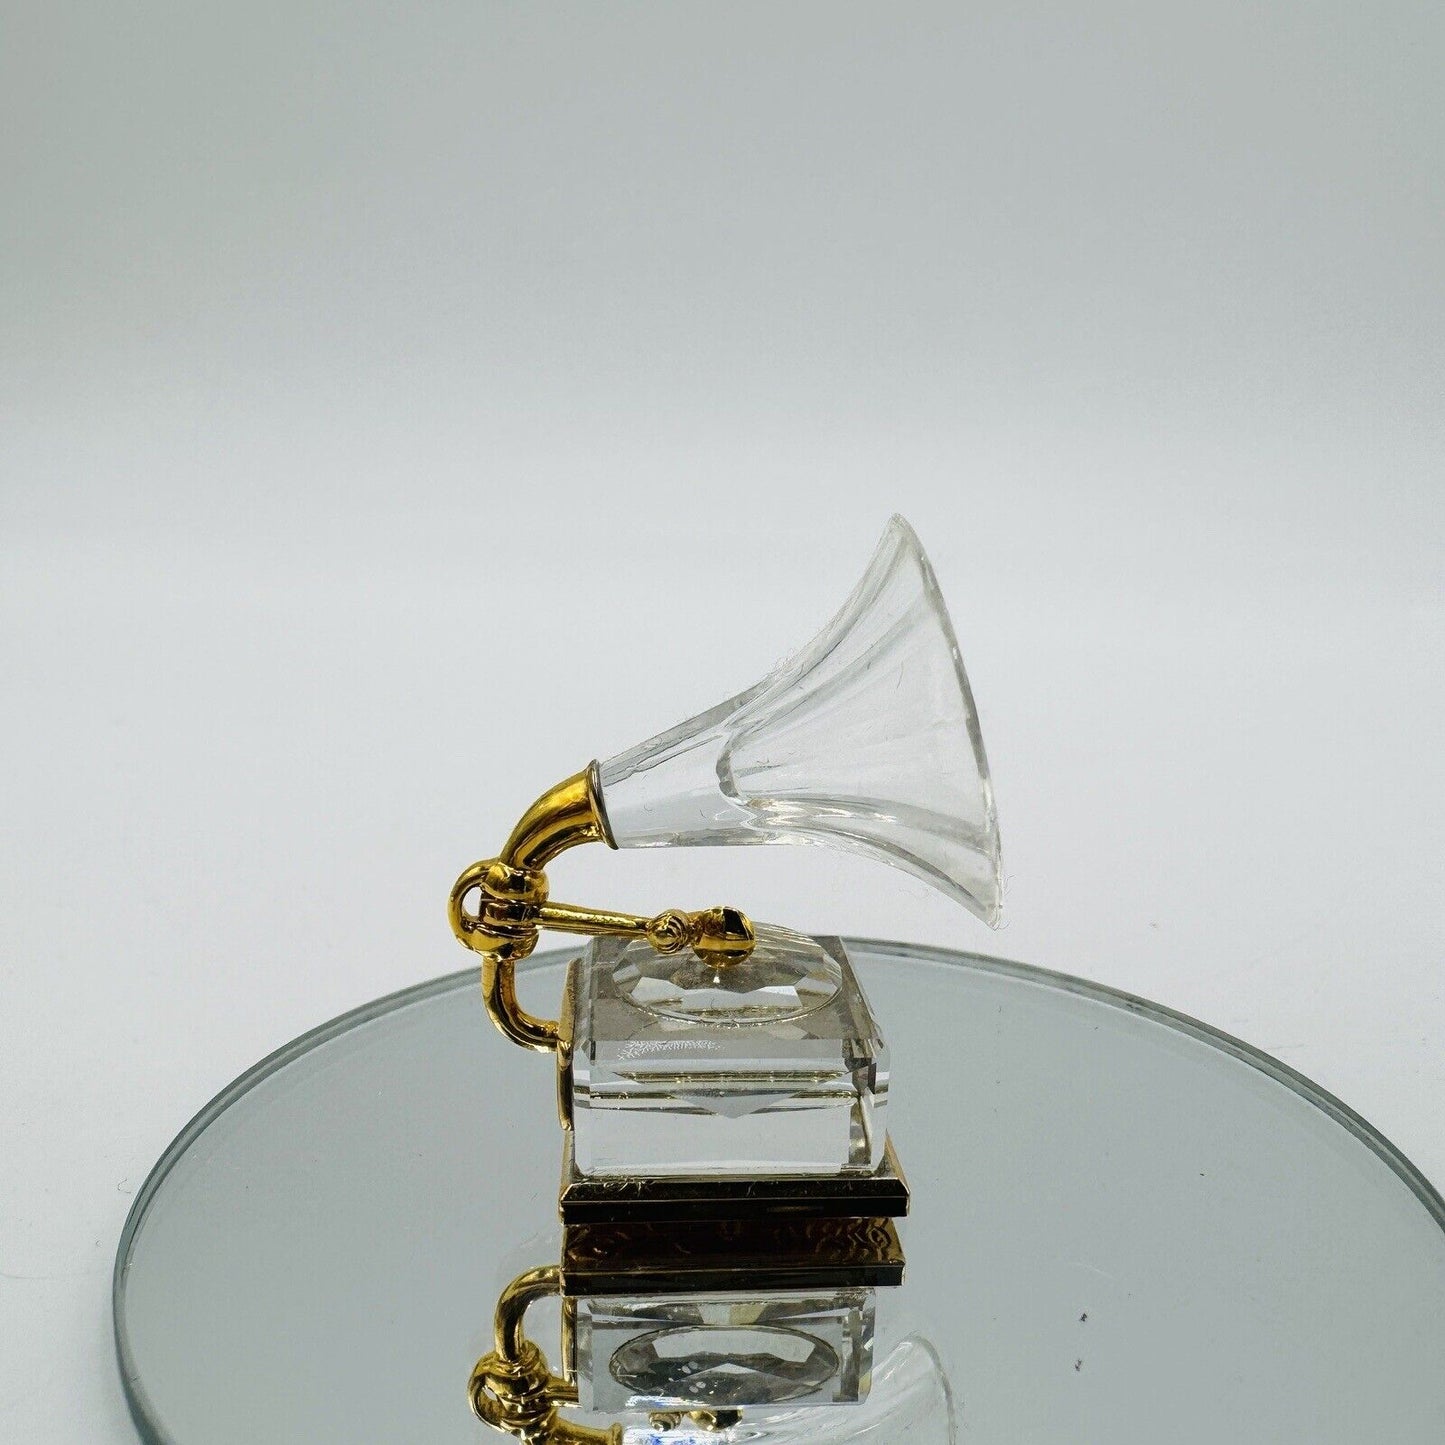 Swarovski Crystal Austria Memories OLD PHONOGRAPH Gold Accents Retired